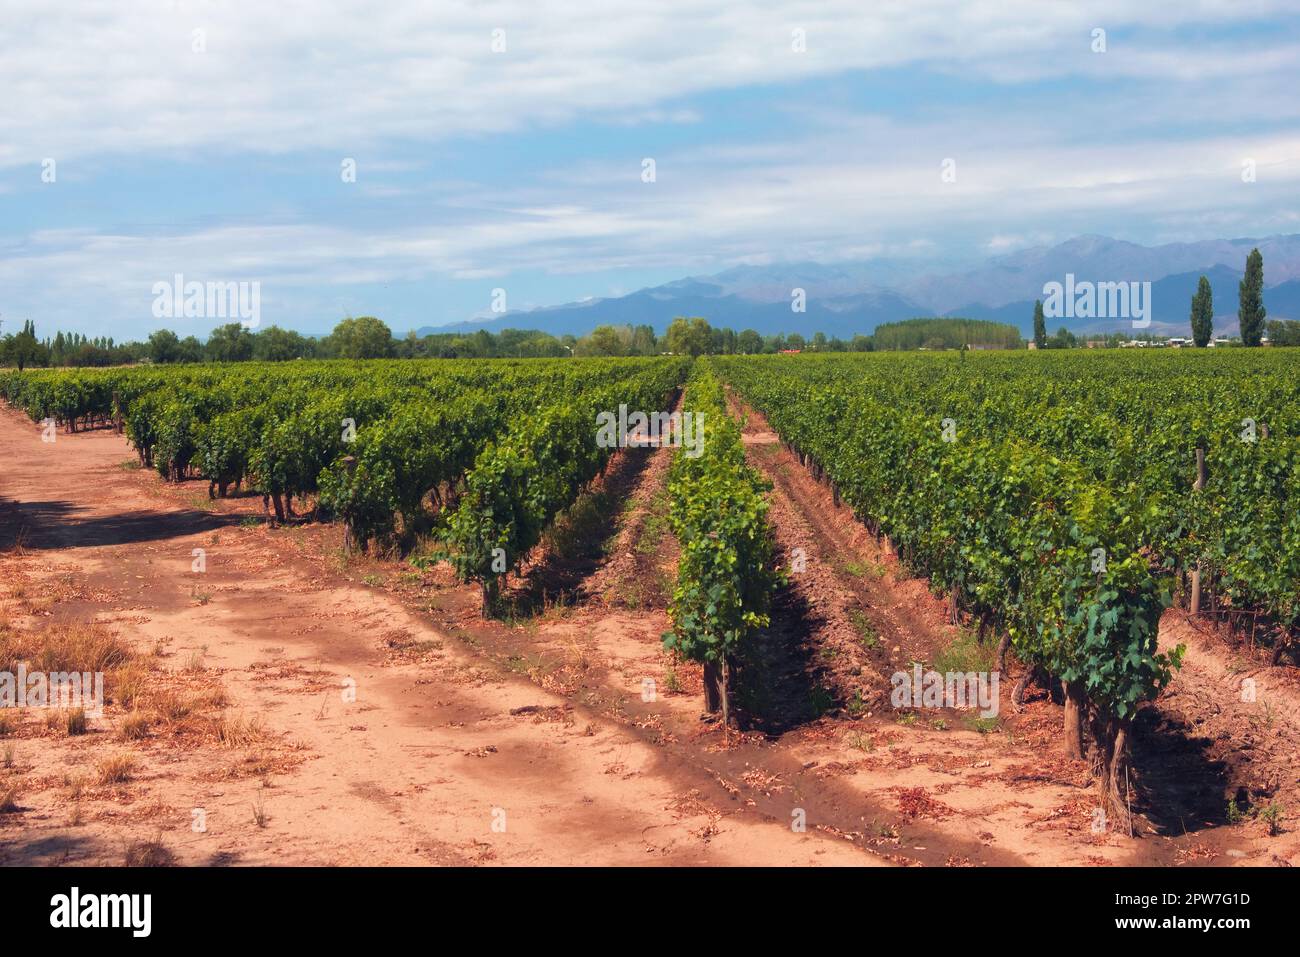 Grapevine rows at a vineyard estate in Mendoza, Argentina, with Andes Mountains in the background. Wine industry, agriculture background. Stock Photo